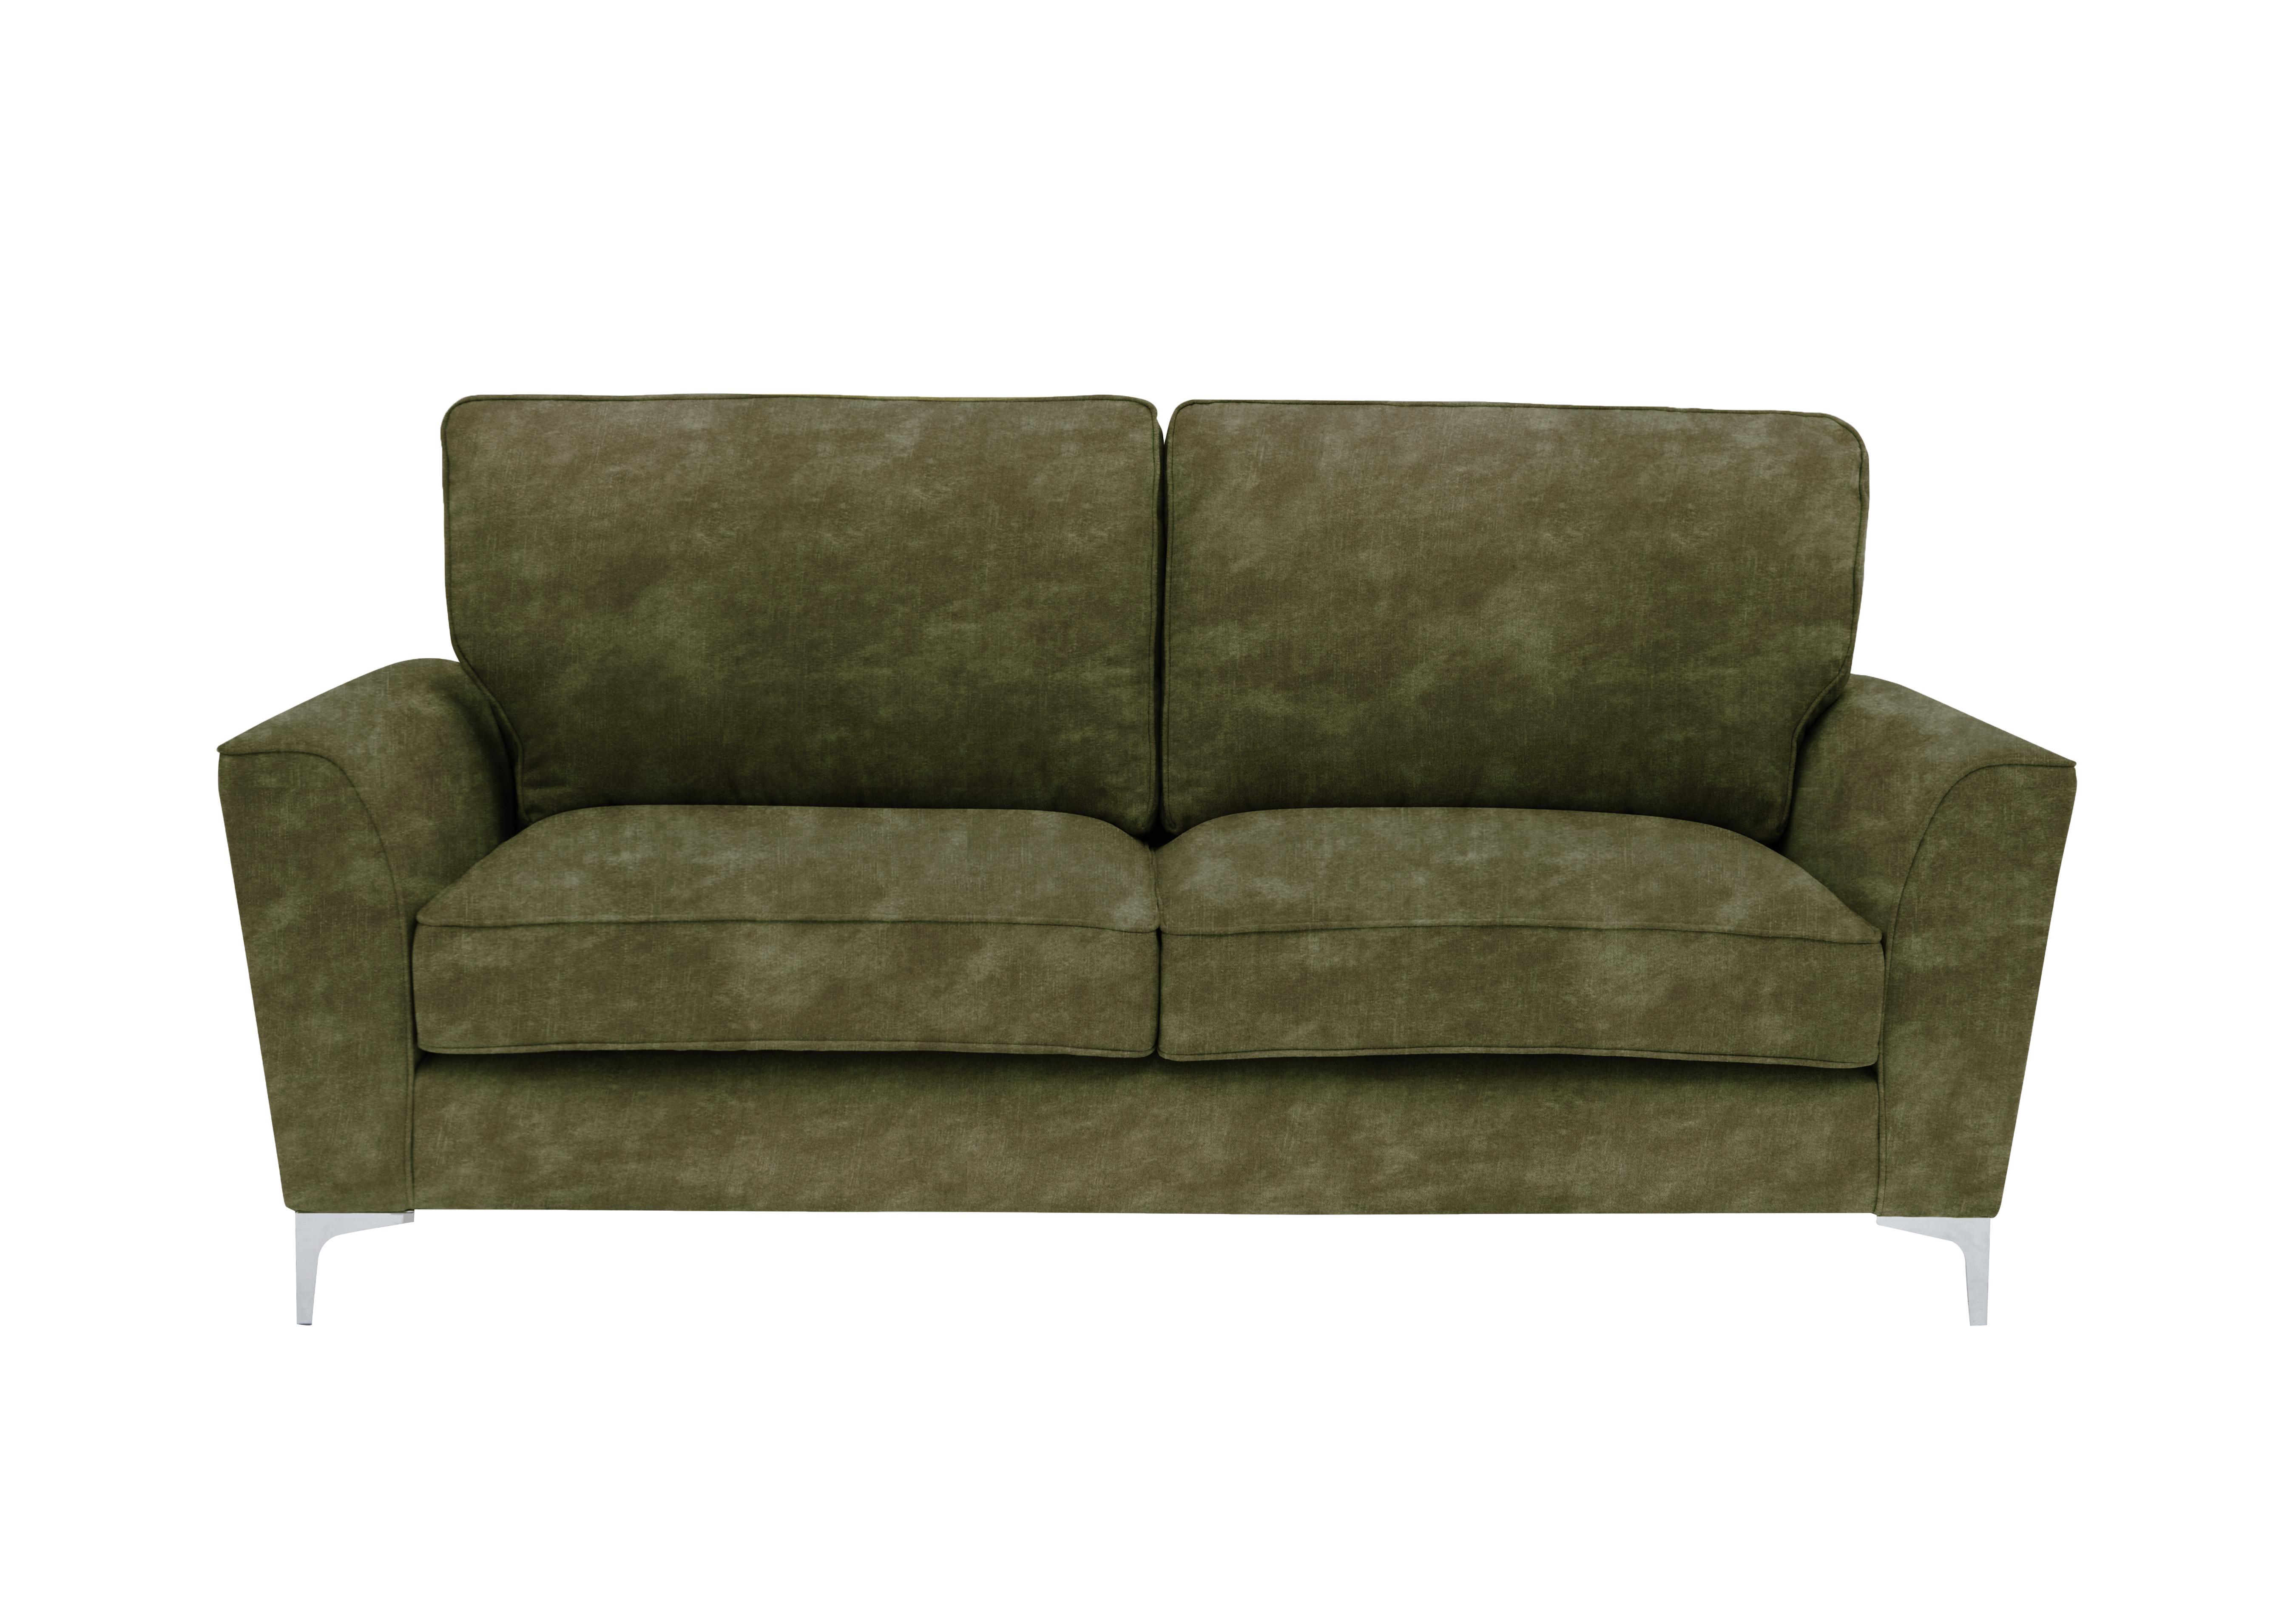 Legend 3 Seater Classic Back Fabric Sofa in Sublime Olive on Furniture Village